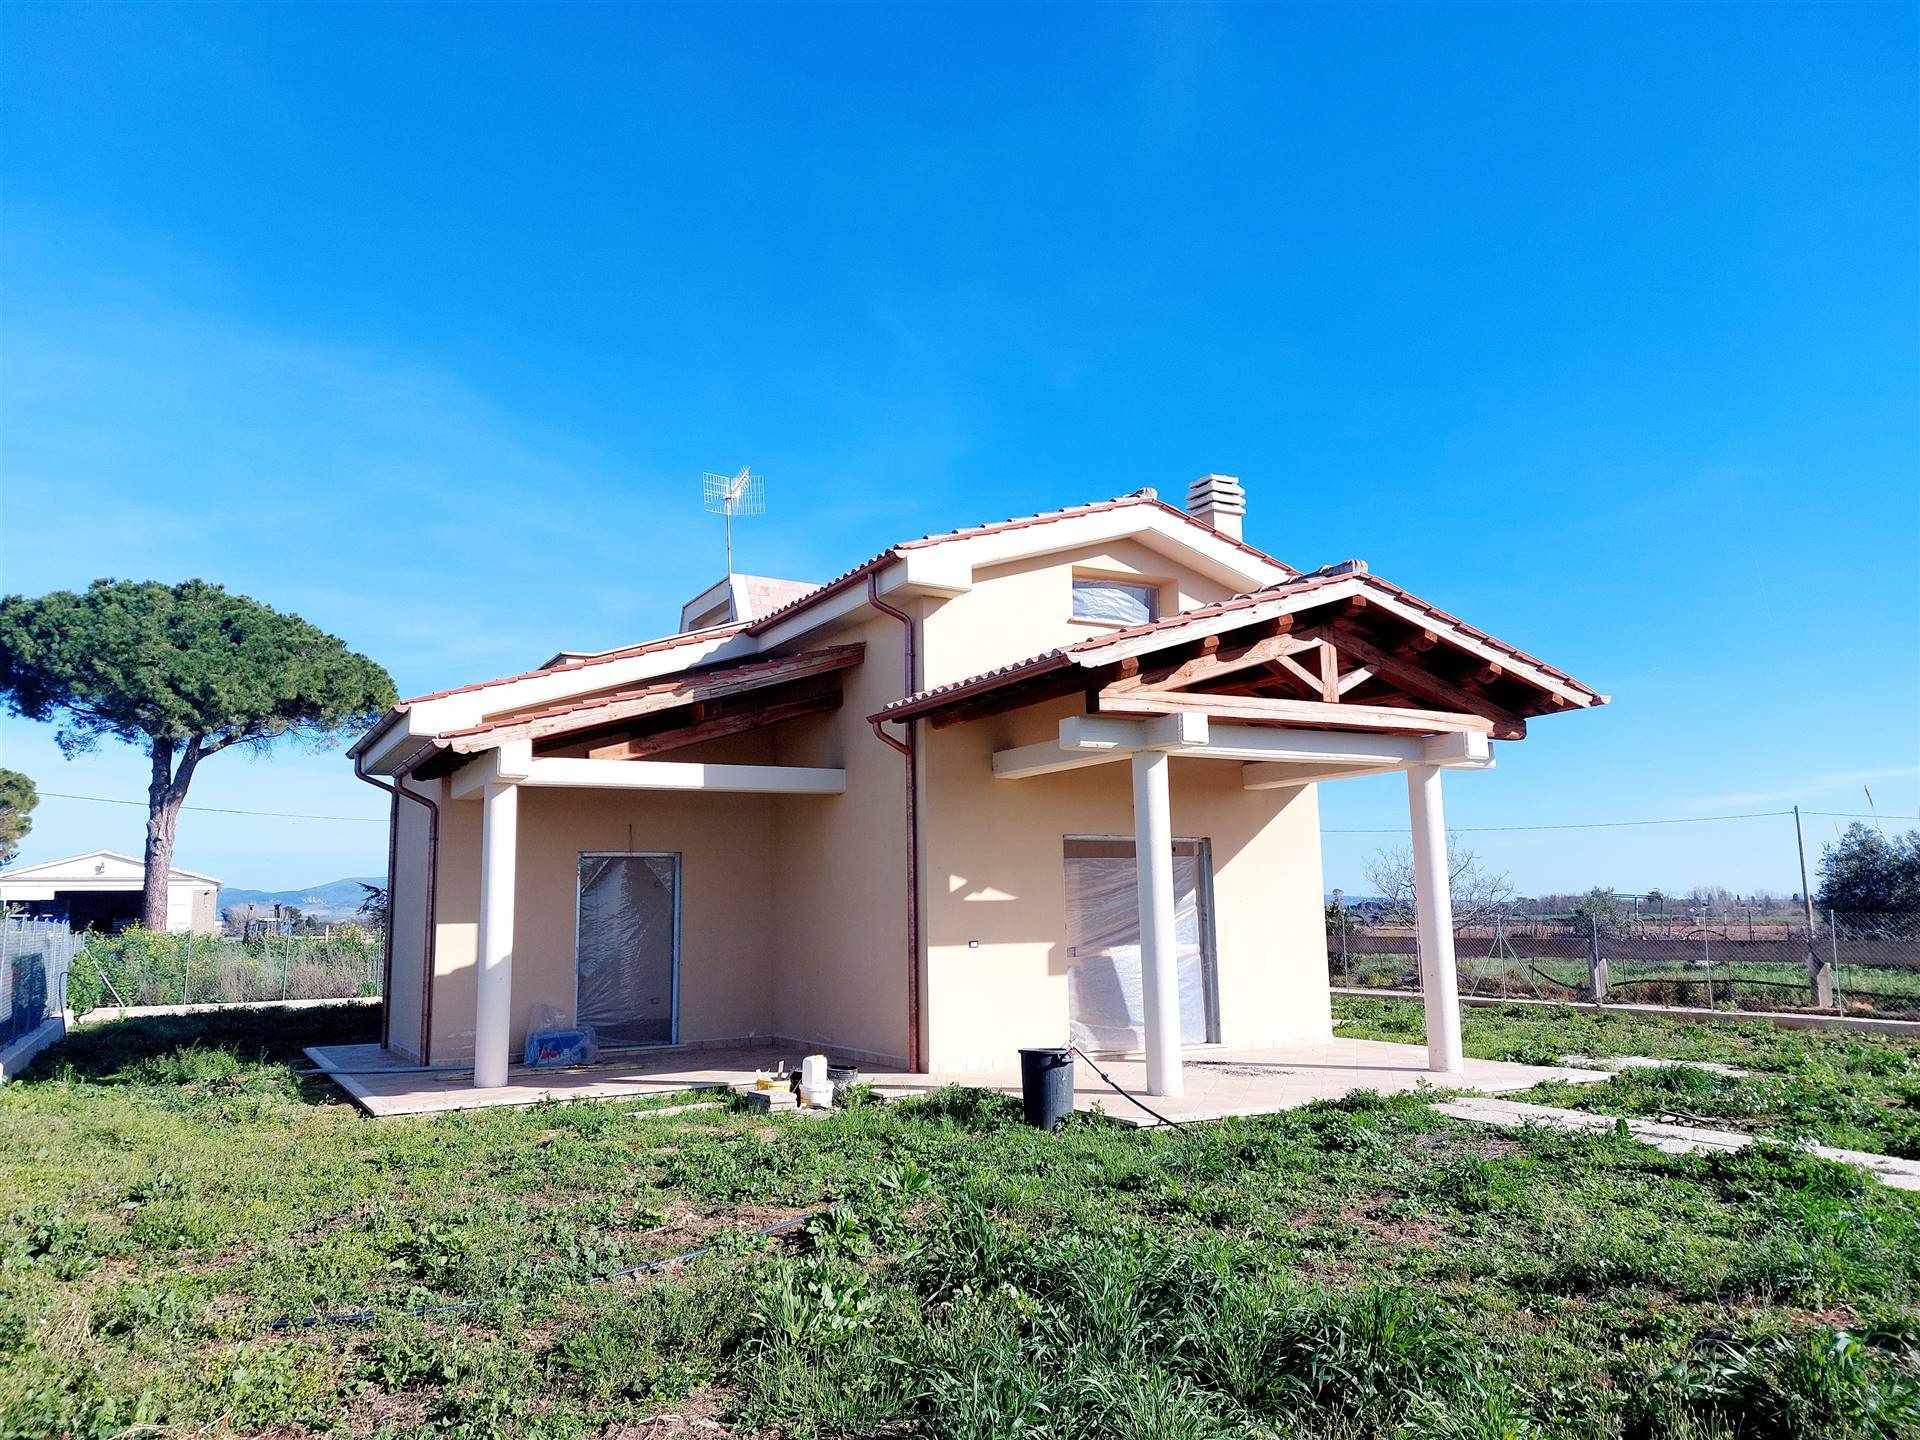 SALINE, TARQUINIA, Villa for sale of 140 Sq. mt., New construction, Heating Individual heating system, Energetic class: A4, composed by: 5 Rooms, 